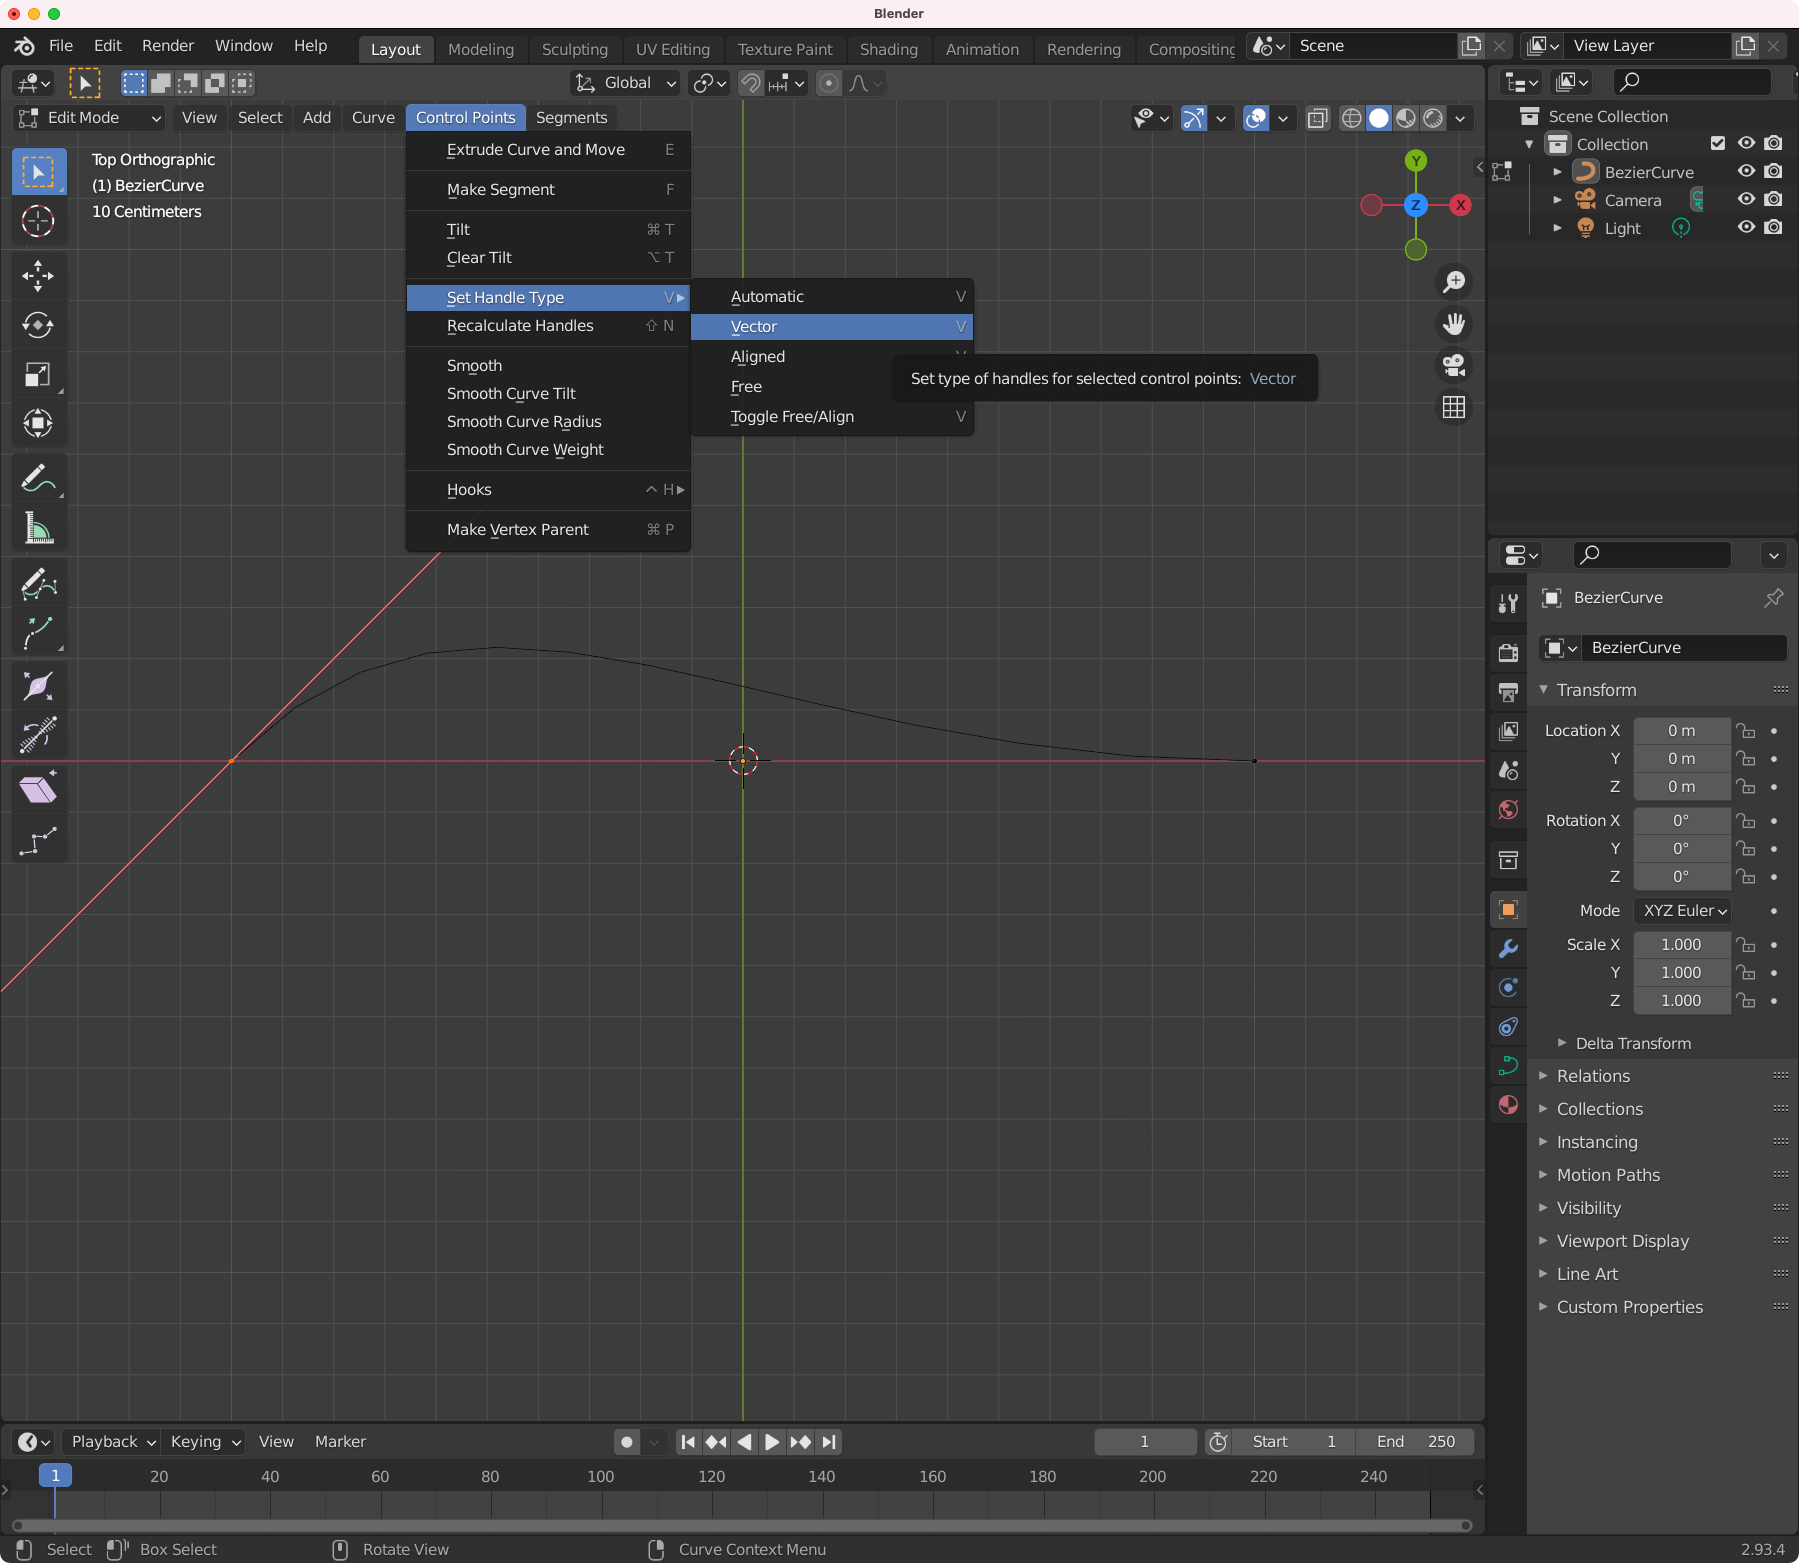 Extend and close curve points in Blender